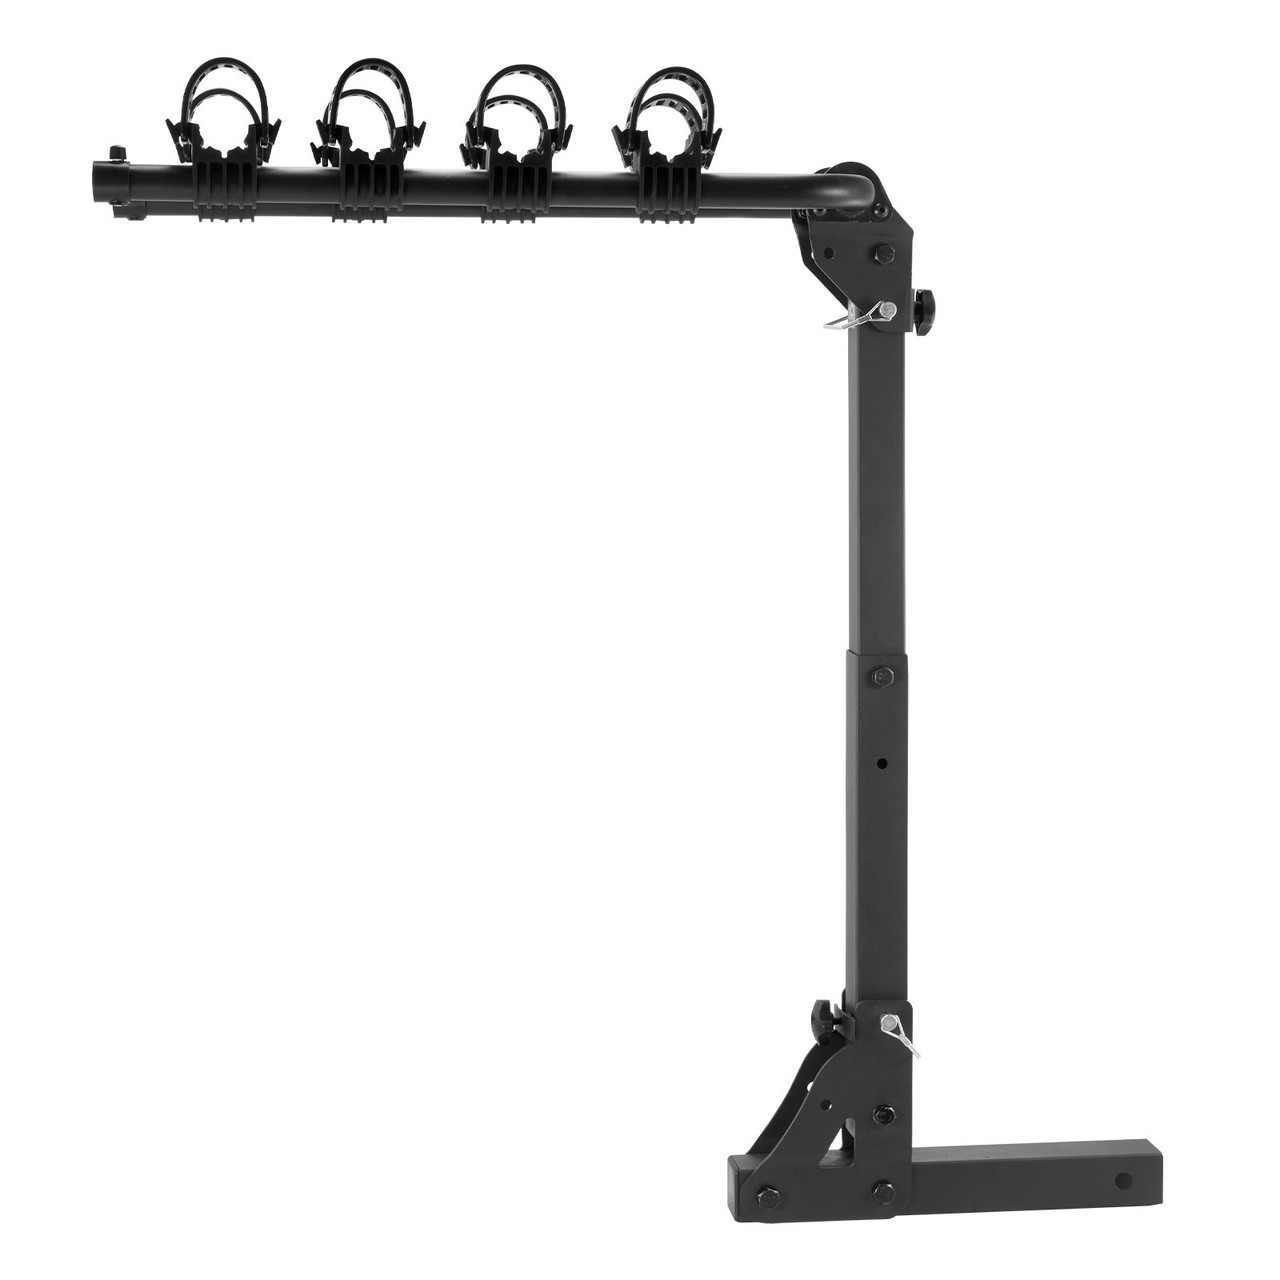 VEVOR Hitch Mount Bike Rack, 4-Bike Carrier Rack, 150 LBS Capacity Bike Rack Hitch for 2-inch Receiver, Titling and Folding Bike Carrier with No-Wobble U Bolt and Strap, for Car, SUV, Truck, RV